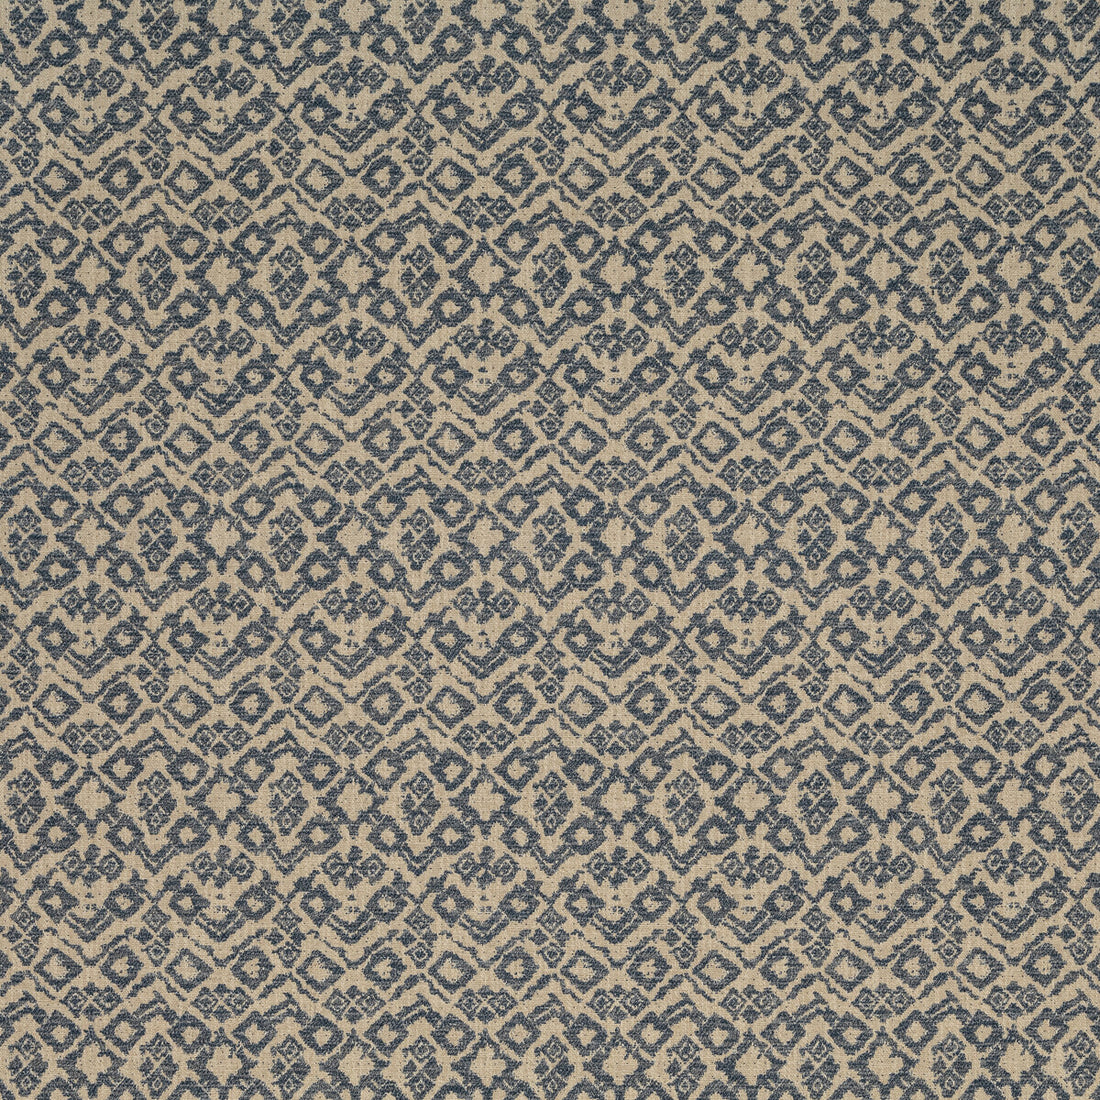 Brooke fabric in chambray color - pattern BFC-3691.5.0 - by Lee Jofa in the Blithfield collection